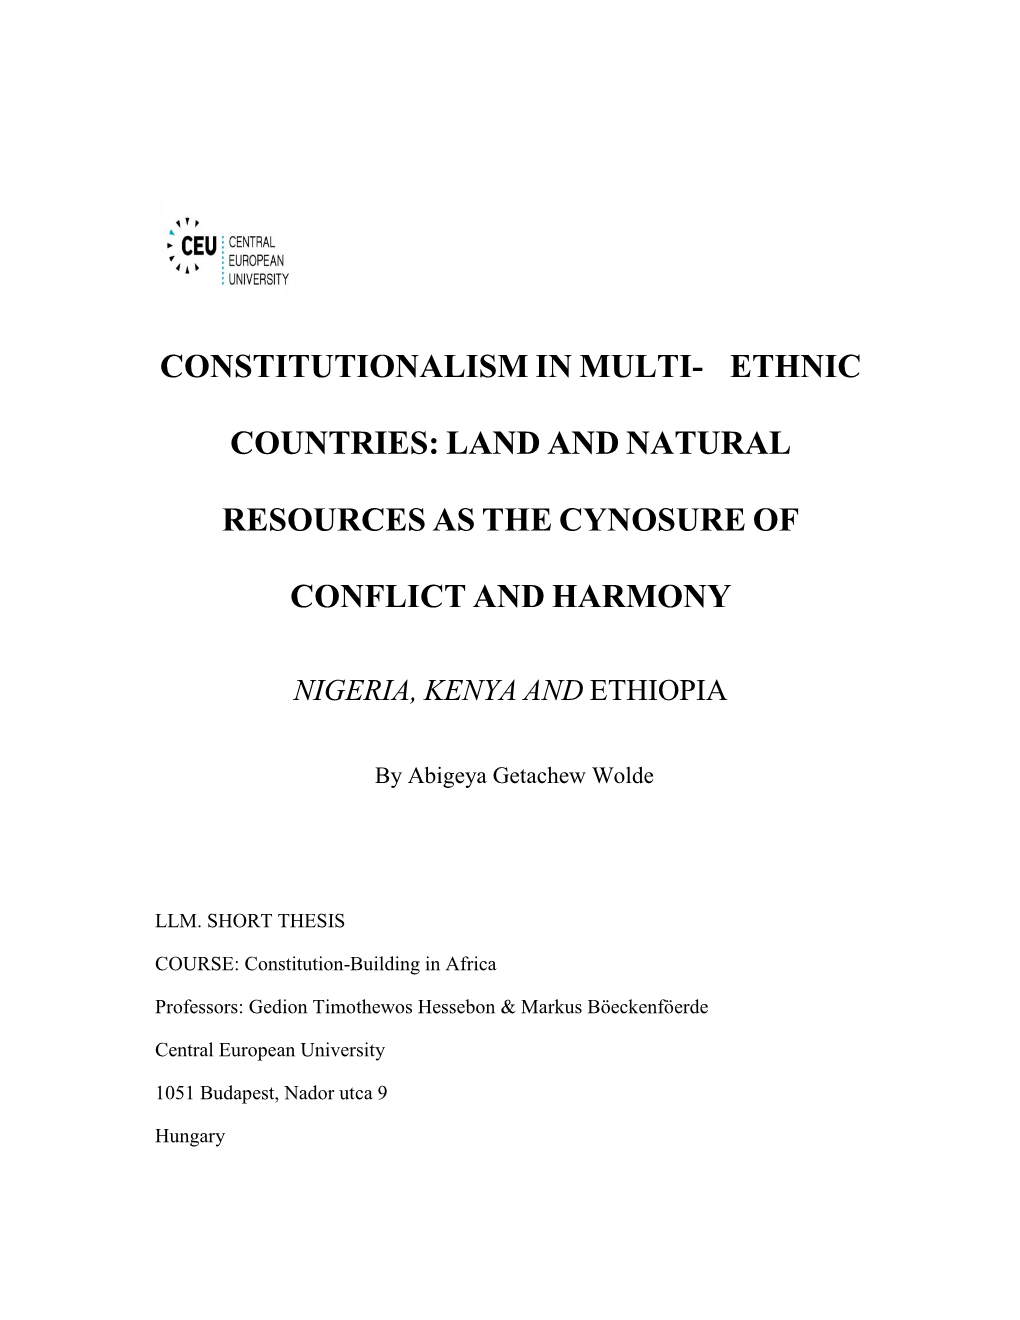 Constitutionalism in Multi- Ethnic Countries: Land and Natural